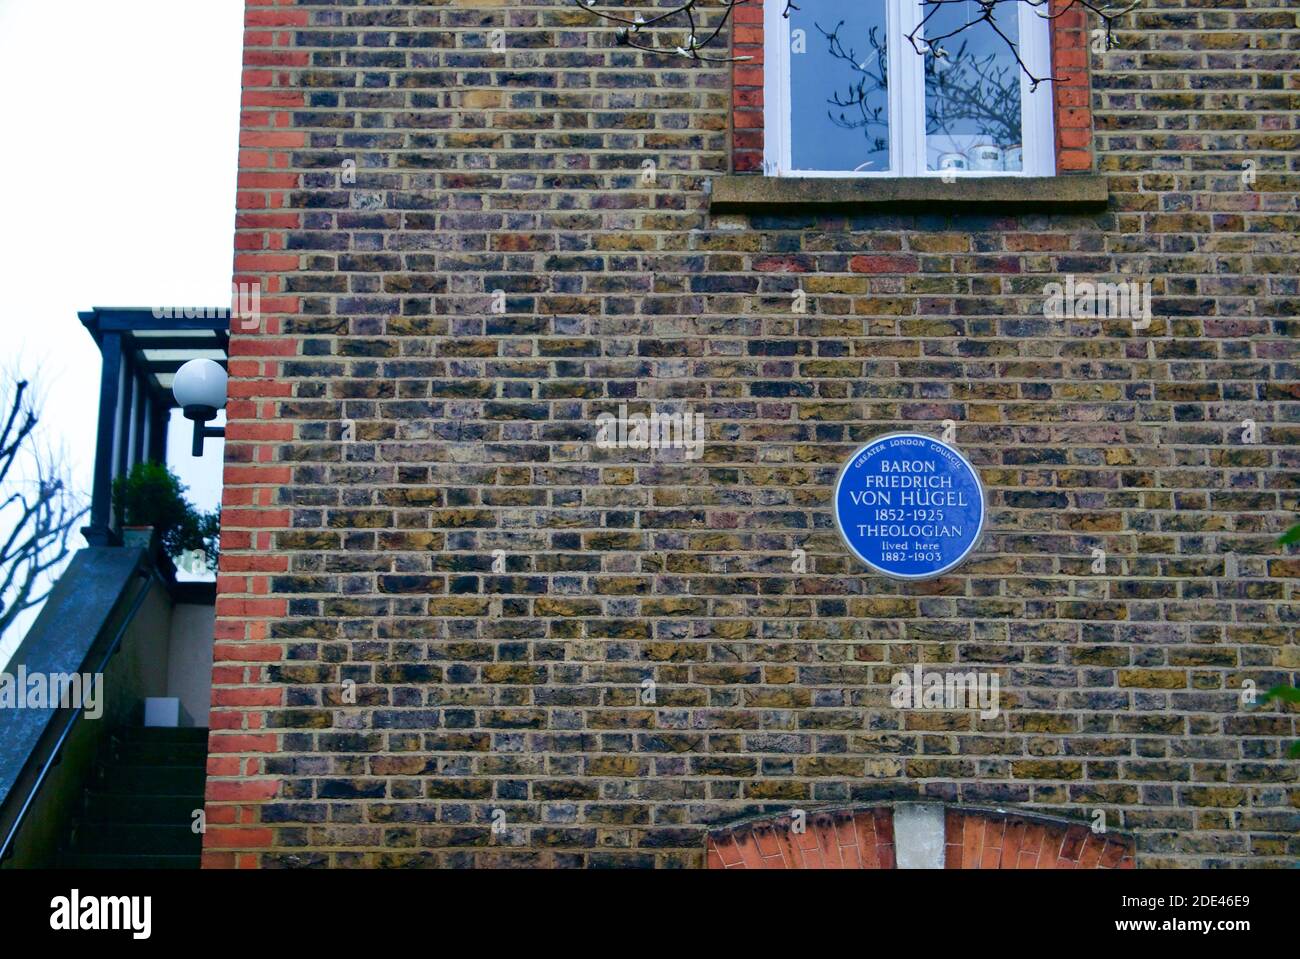 Baron Friedrich Von Hugel, a theologian, blue plaque depicting where he lived in Hampstead Village, London. Stock Photo